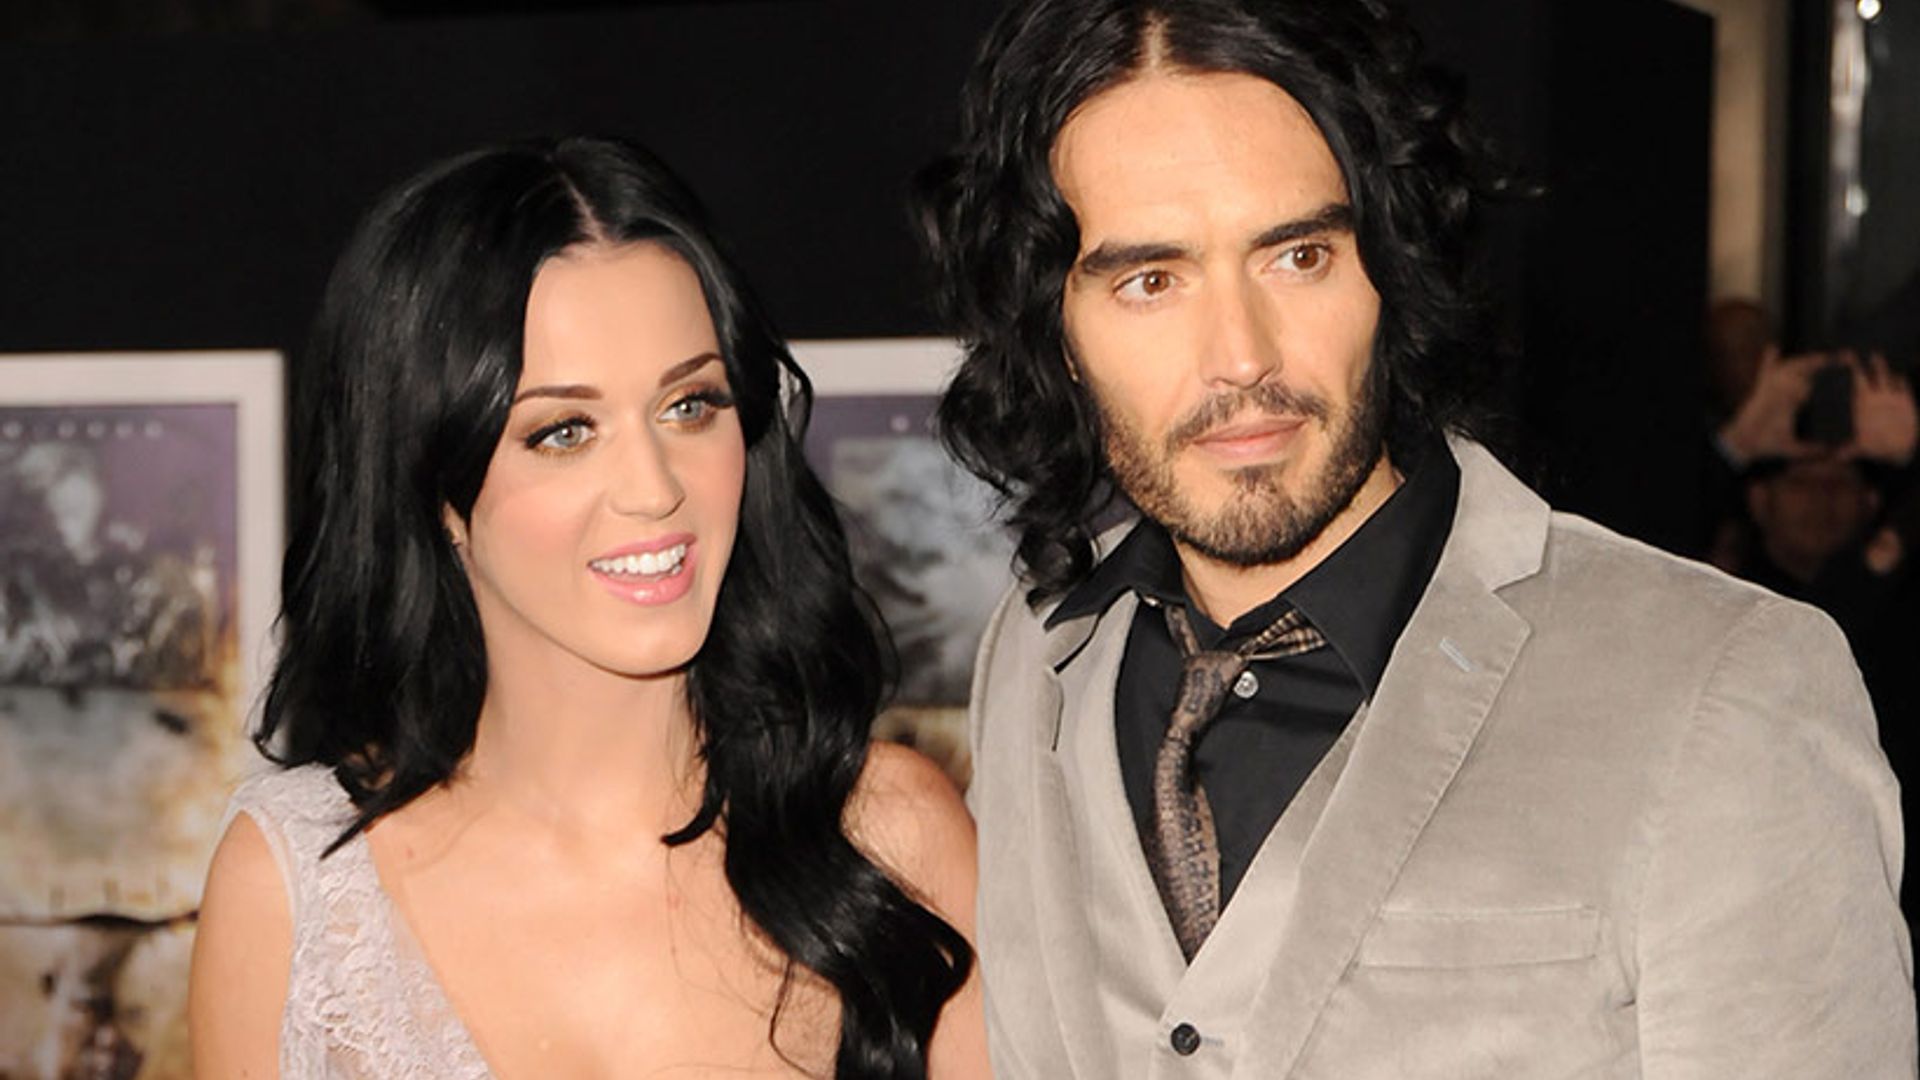 Image result for russell brand katy perry